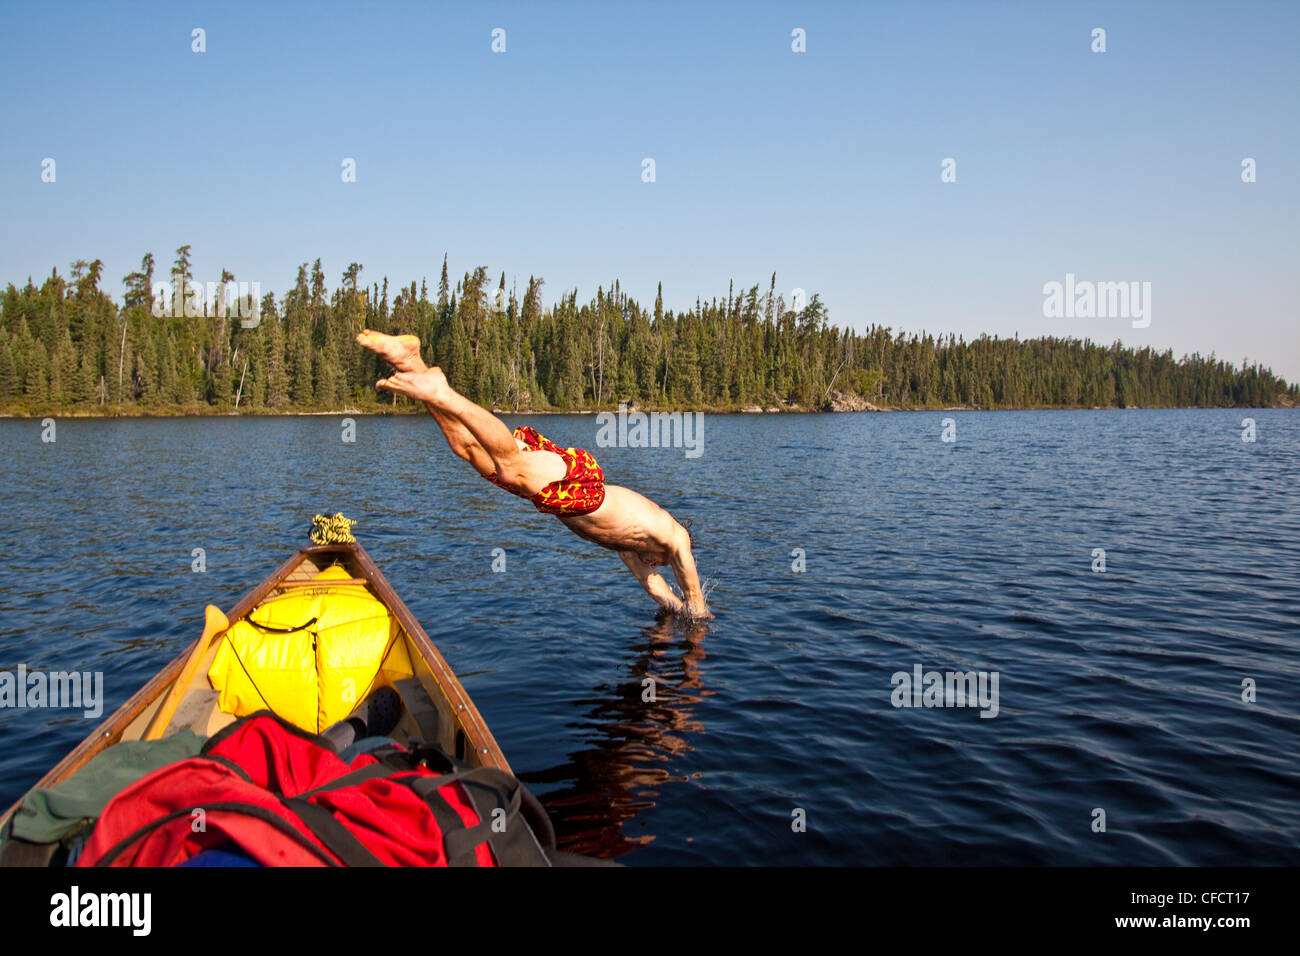 A man cooling off and diving into a lake on a hot day while canoeing and camping in Wabakimi Provincial Park, Ontario, Canada Stock Photo